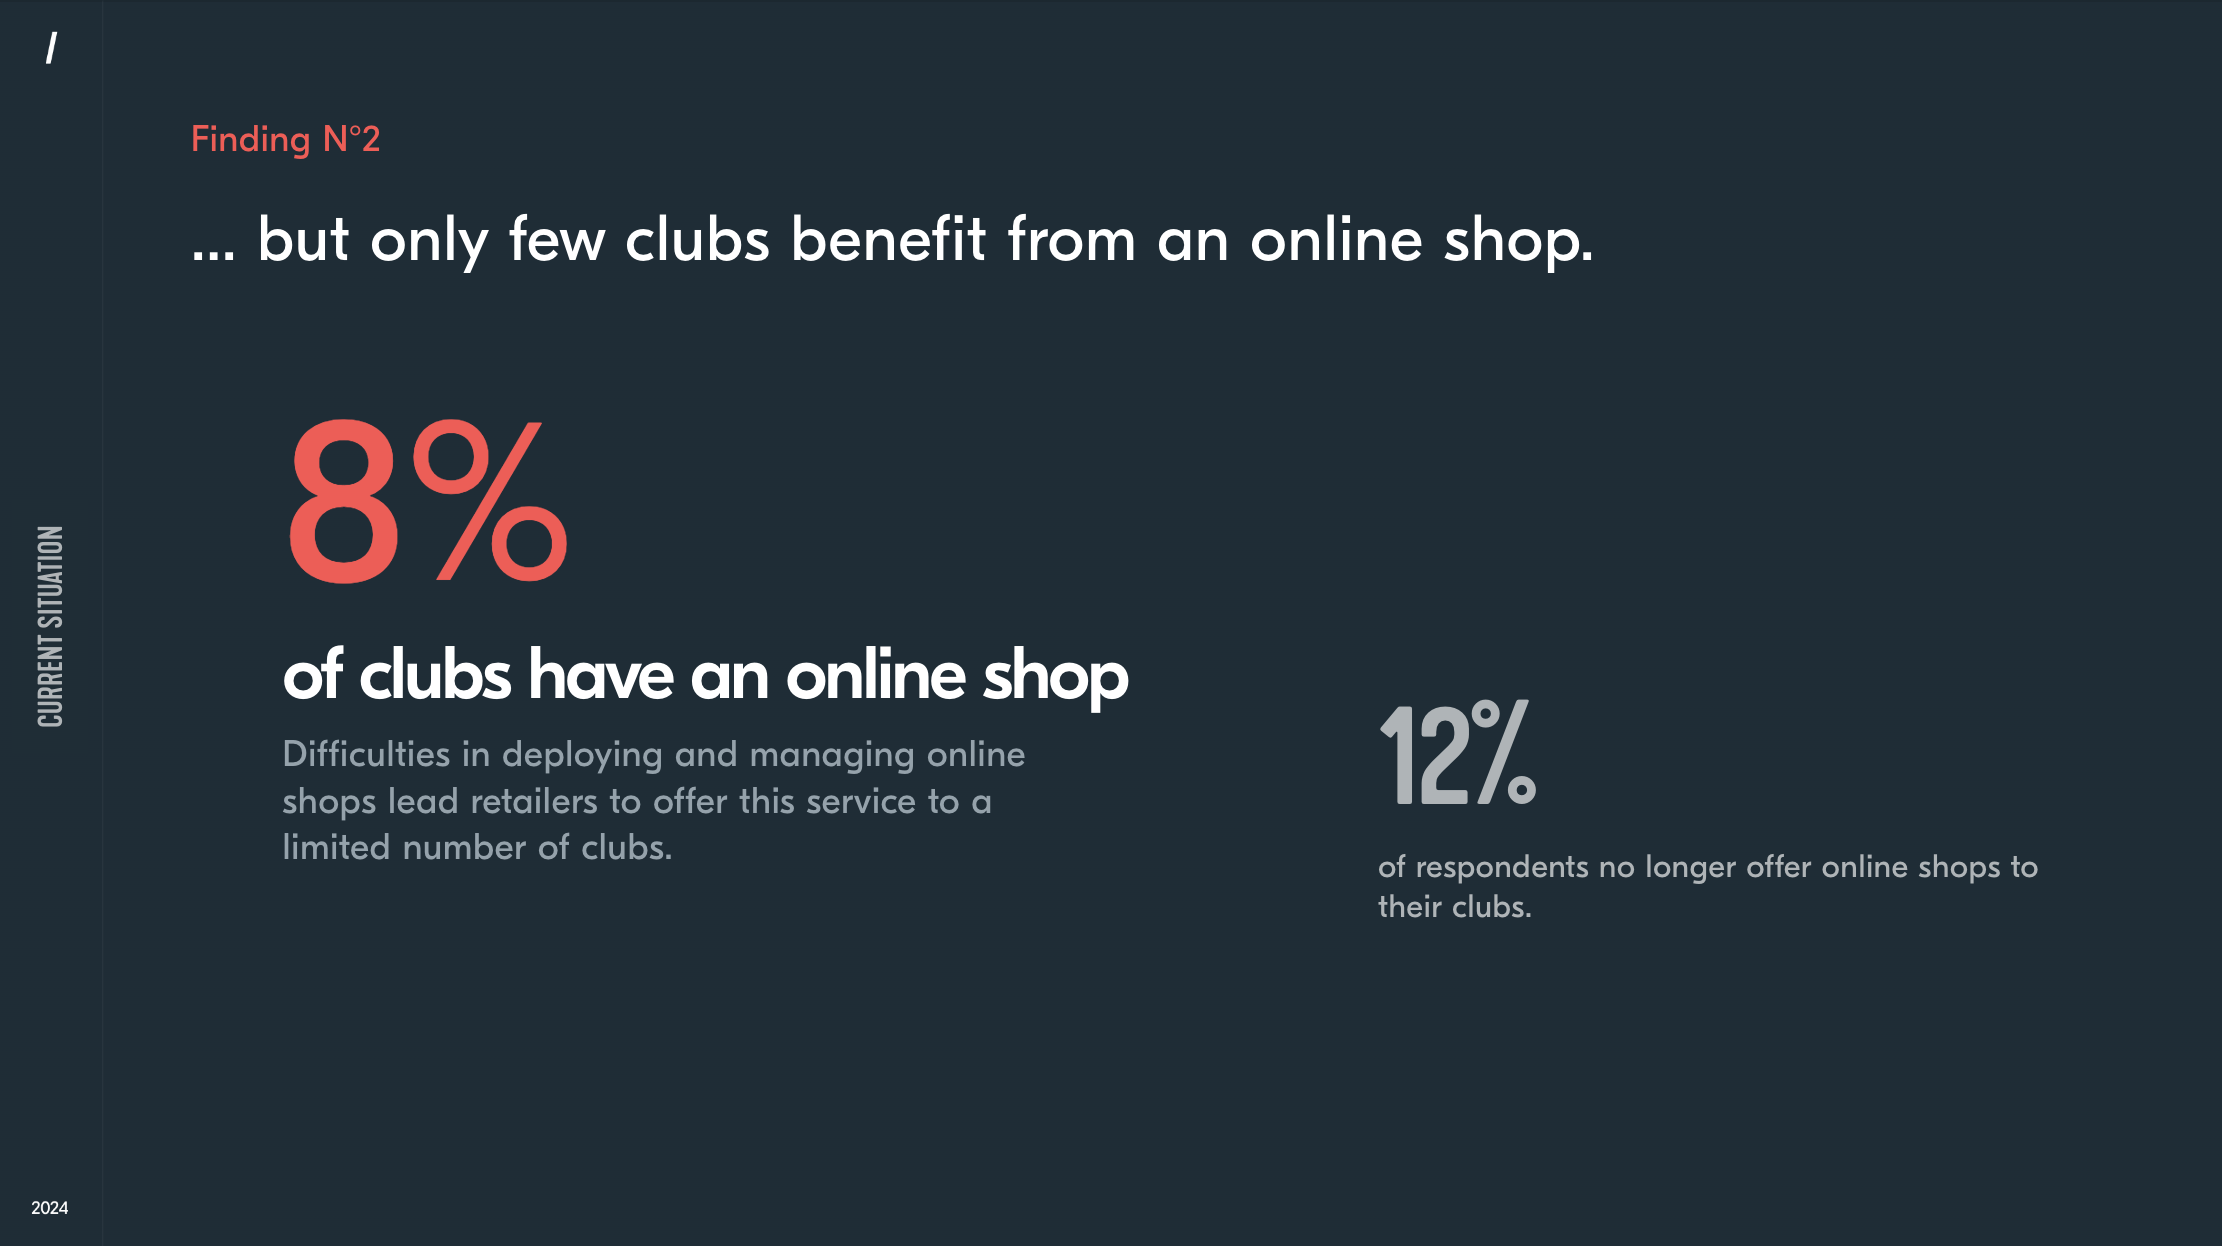 Online club shops : current situation, challenges & analysis